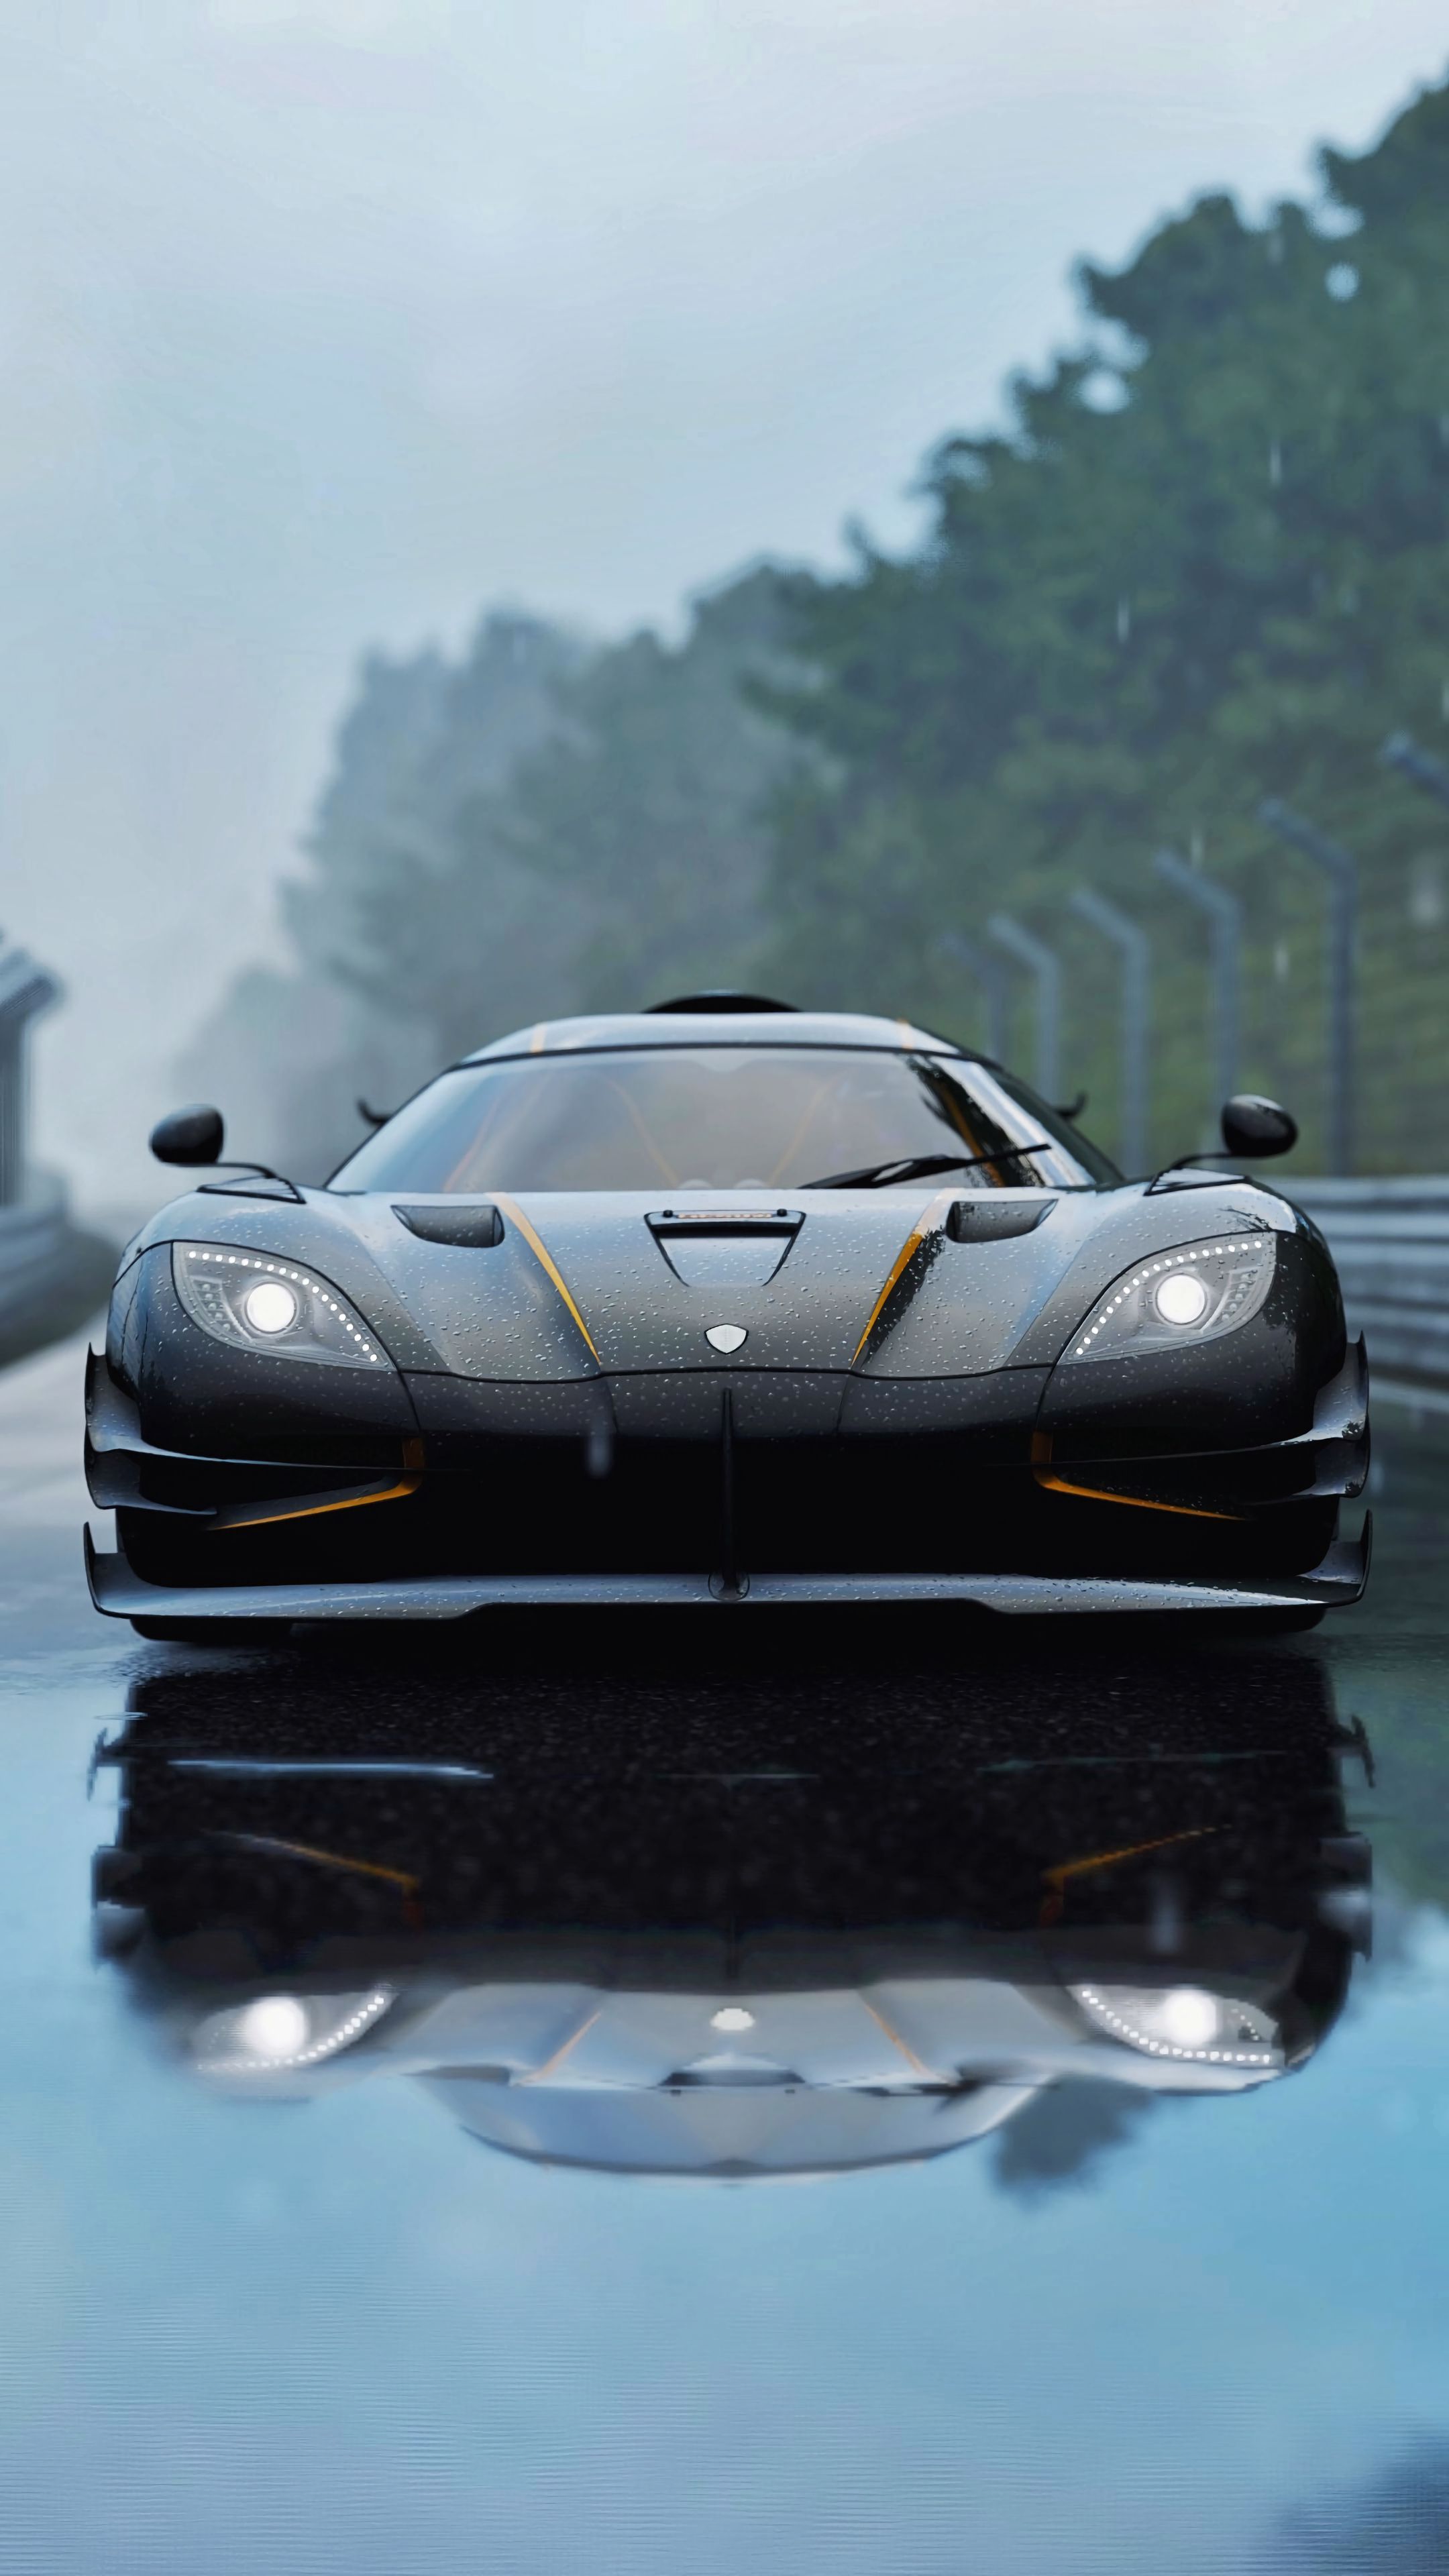 126730 download wallpaper koenigsegg, races, sports, cars, front view, sports car, koenigsegg ccx screensavers and pictures for free